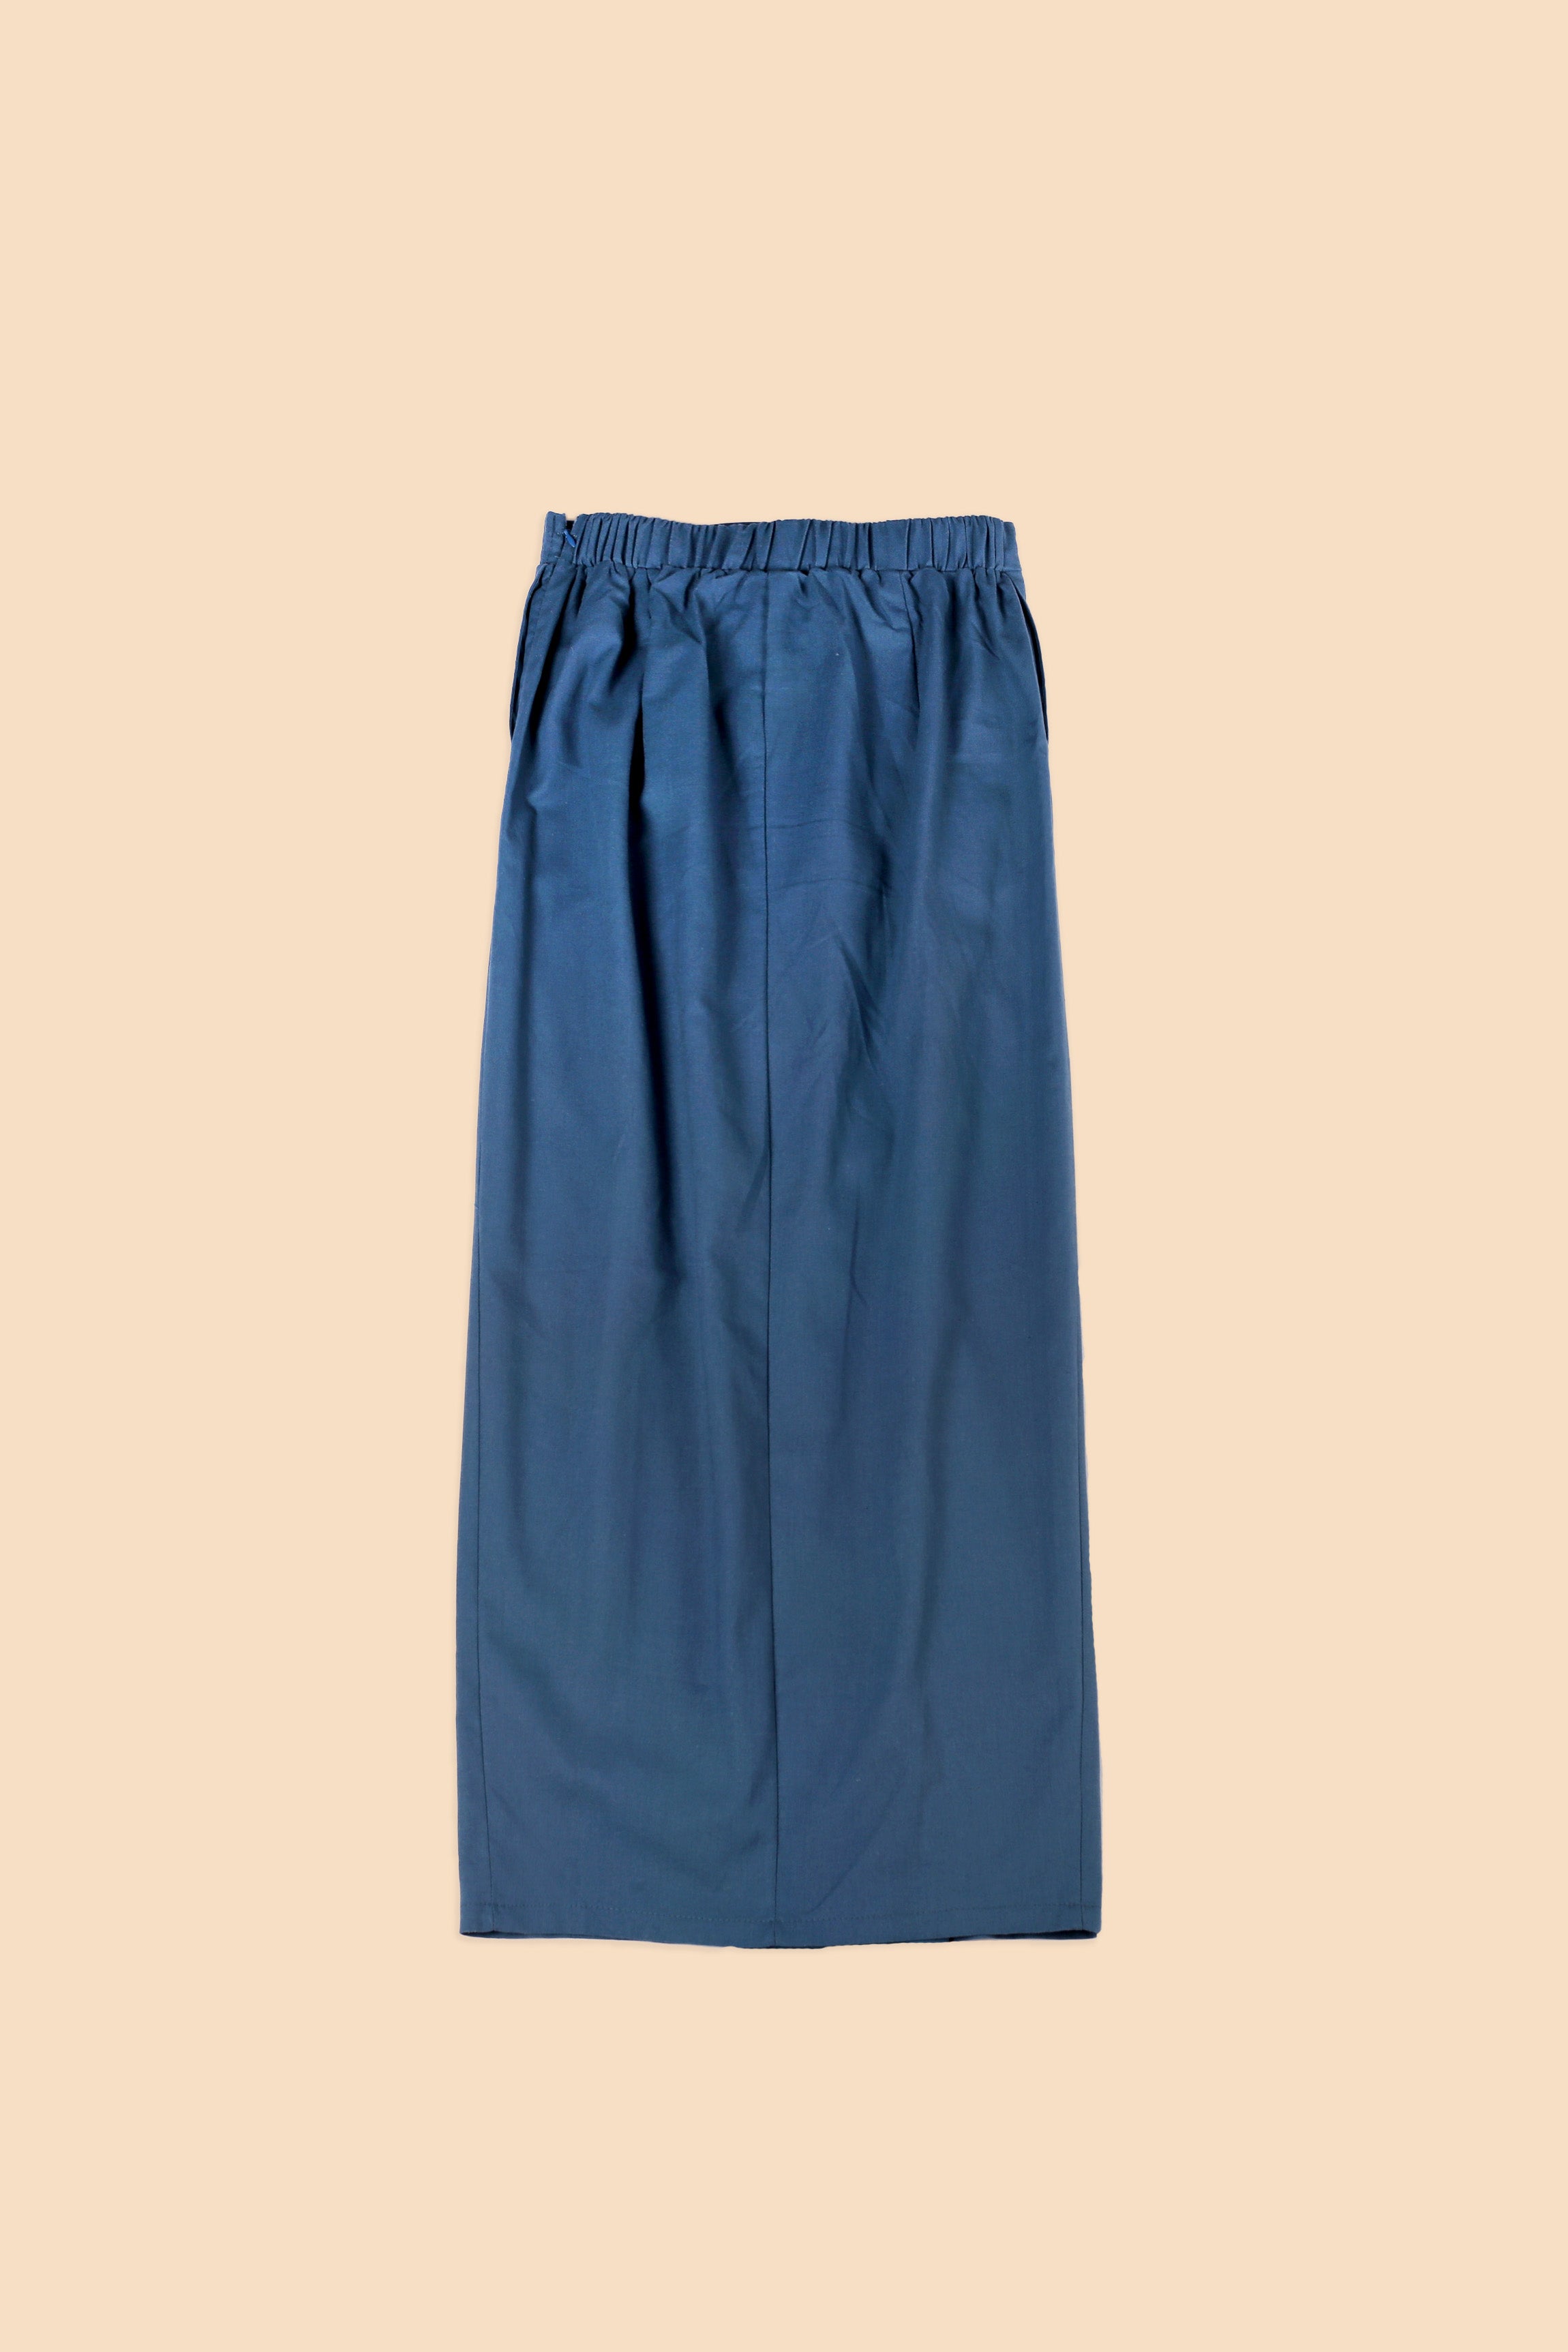 The Coral Women Classic Skirt Steel Blue